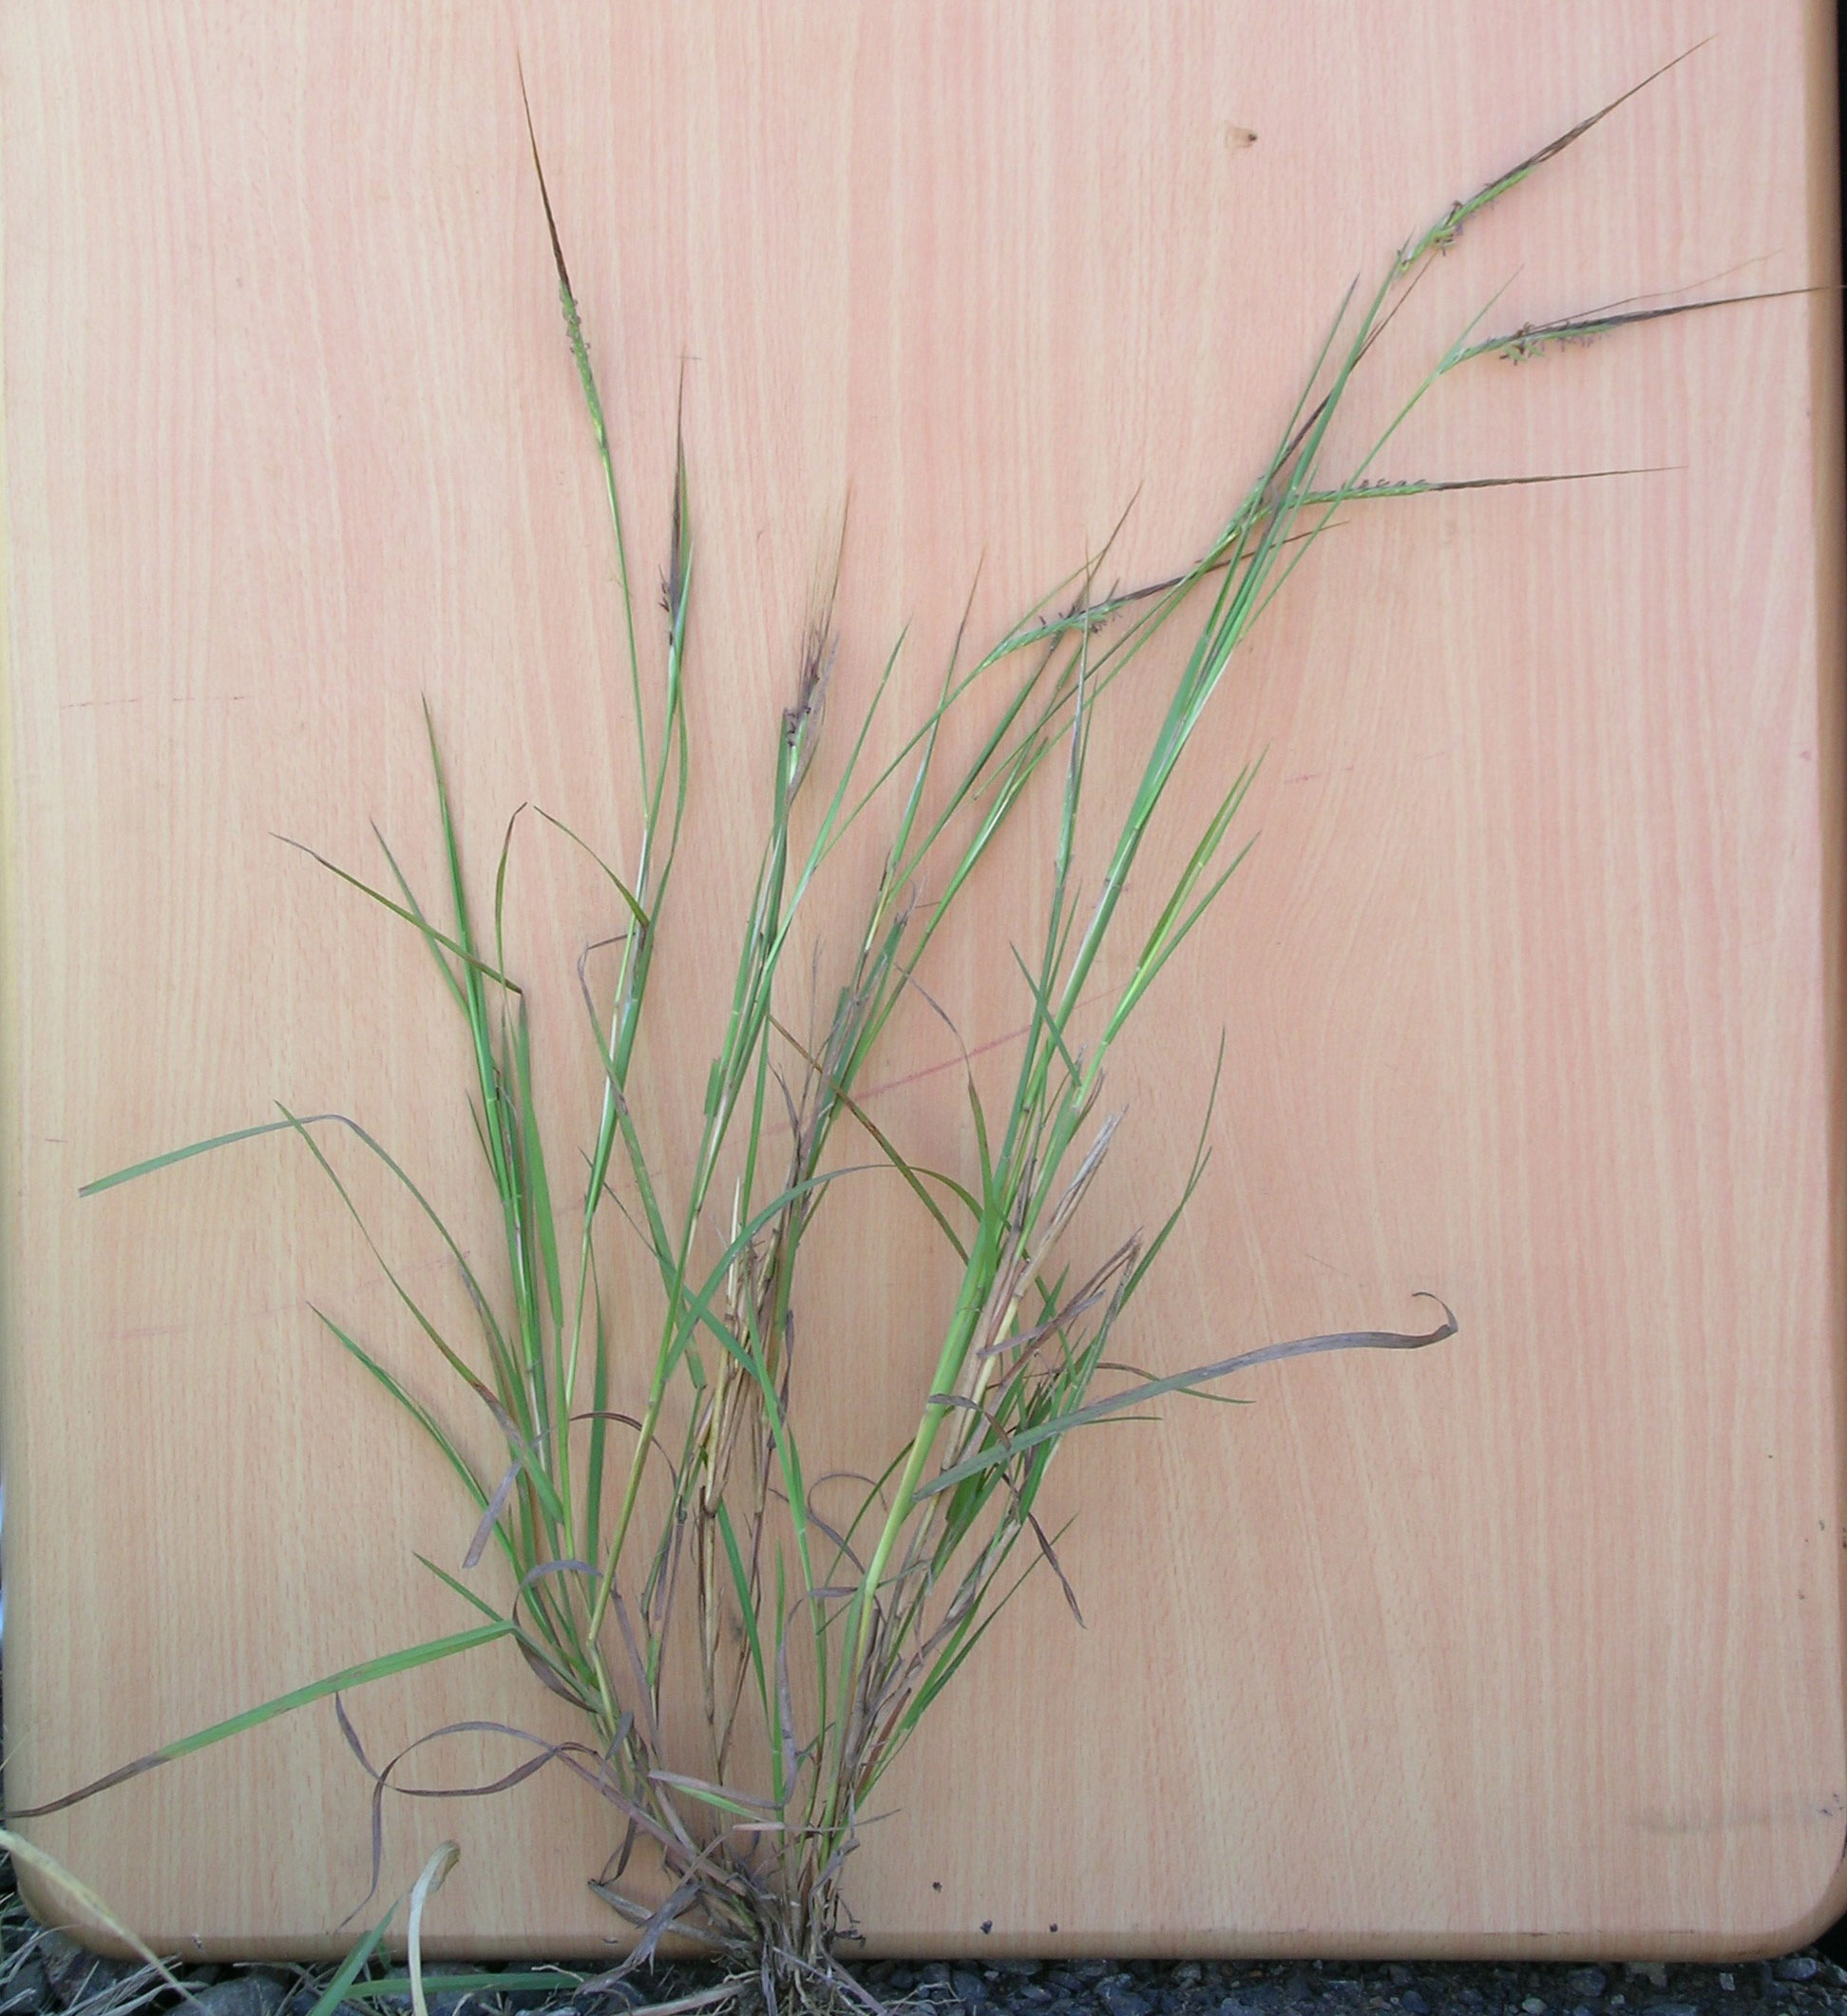 Photograph of an uprooted tanglehead plant laying on a wooden board. The plant consists of multiple stems with green leaves and pointed inflorescences.